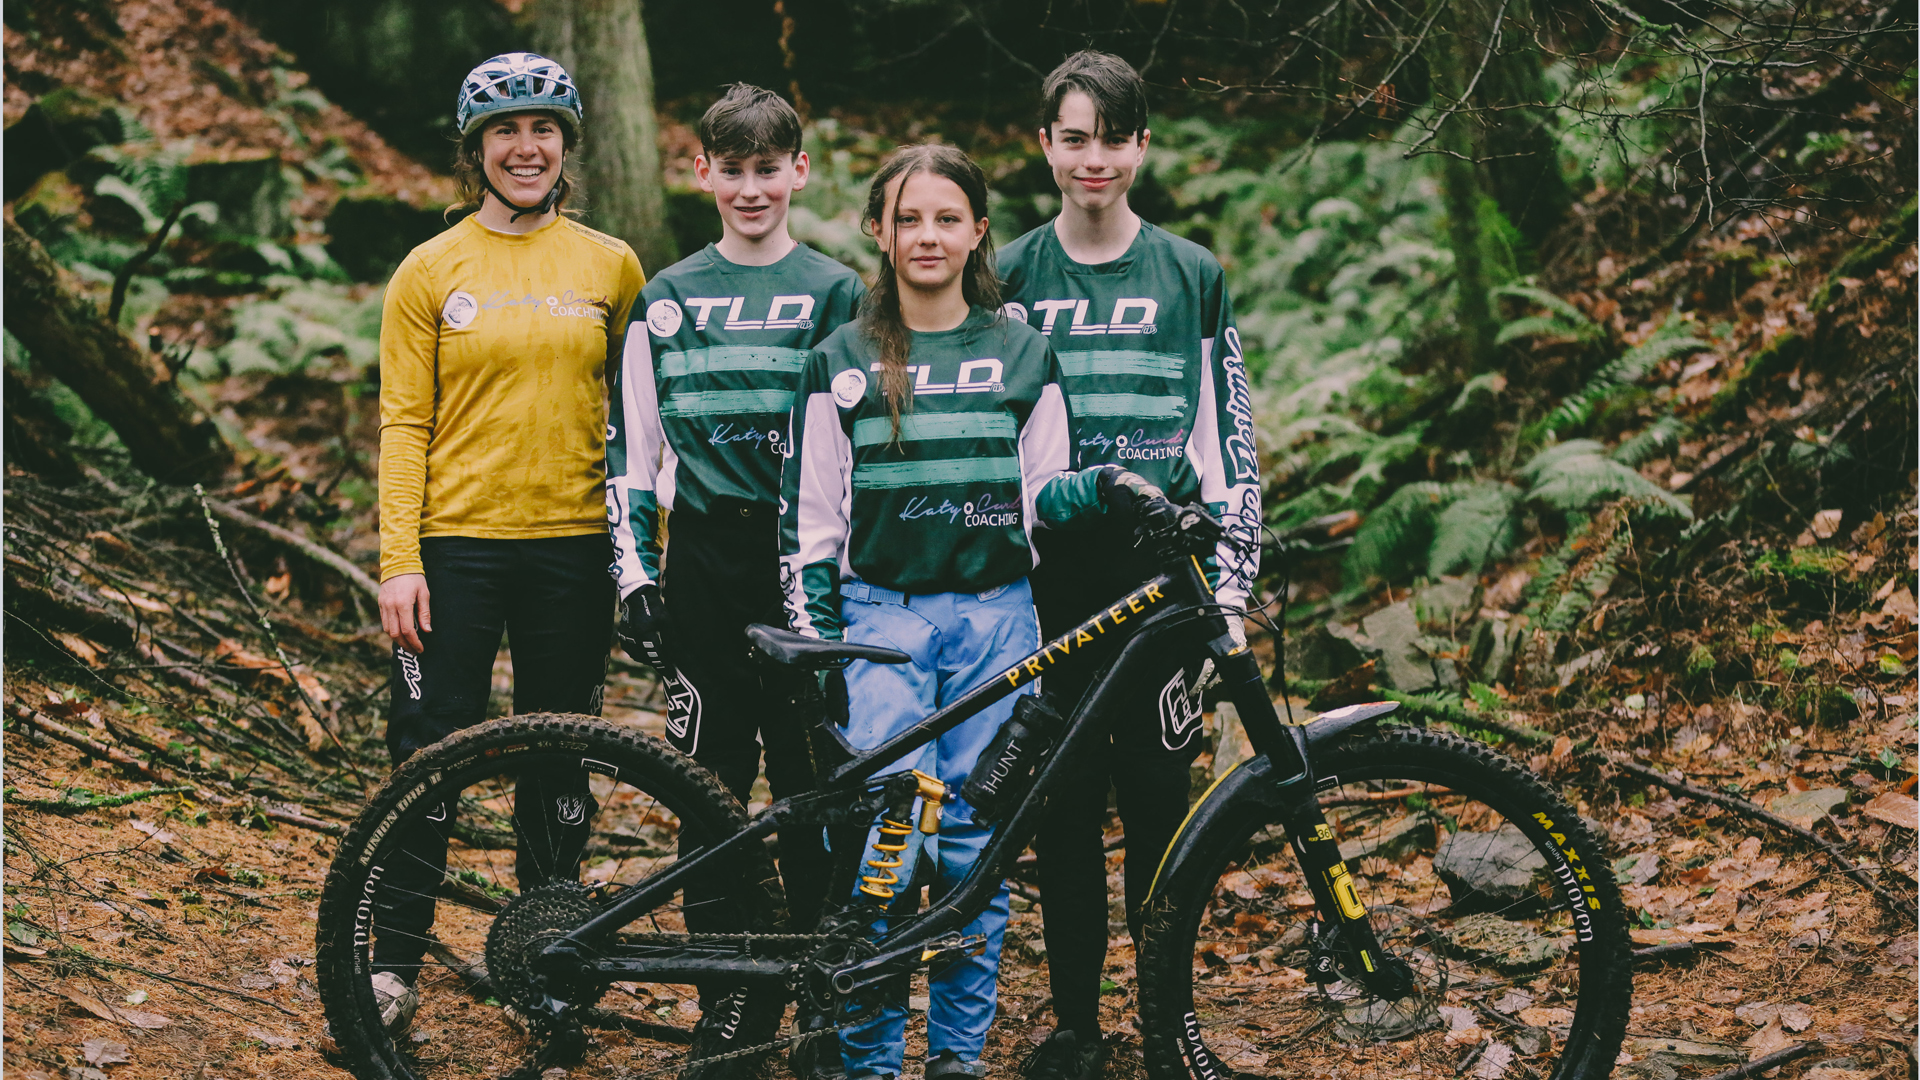 Introducing the Katy Curd Youth Development Team – Mountain Bike Press Release